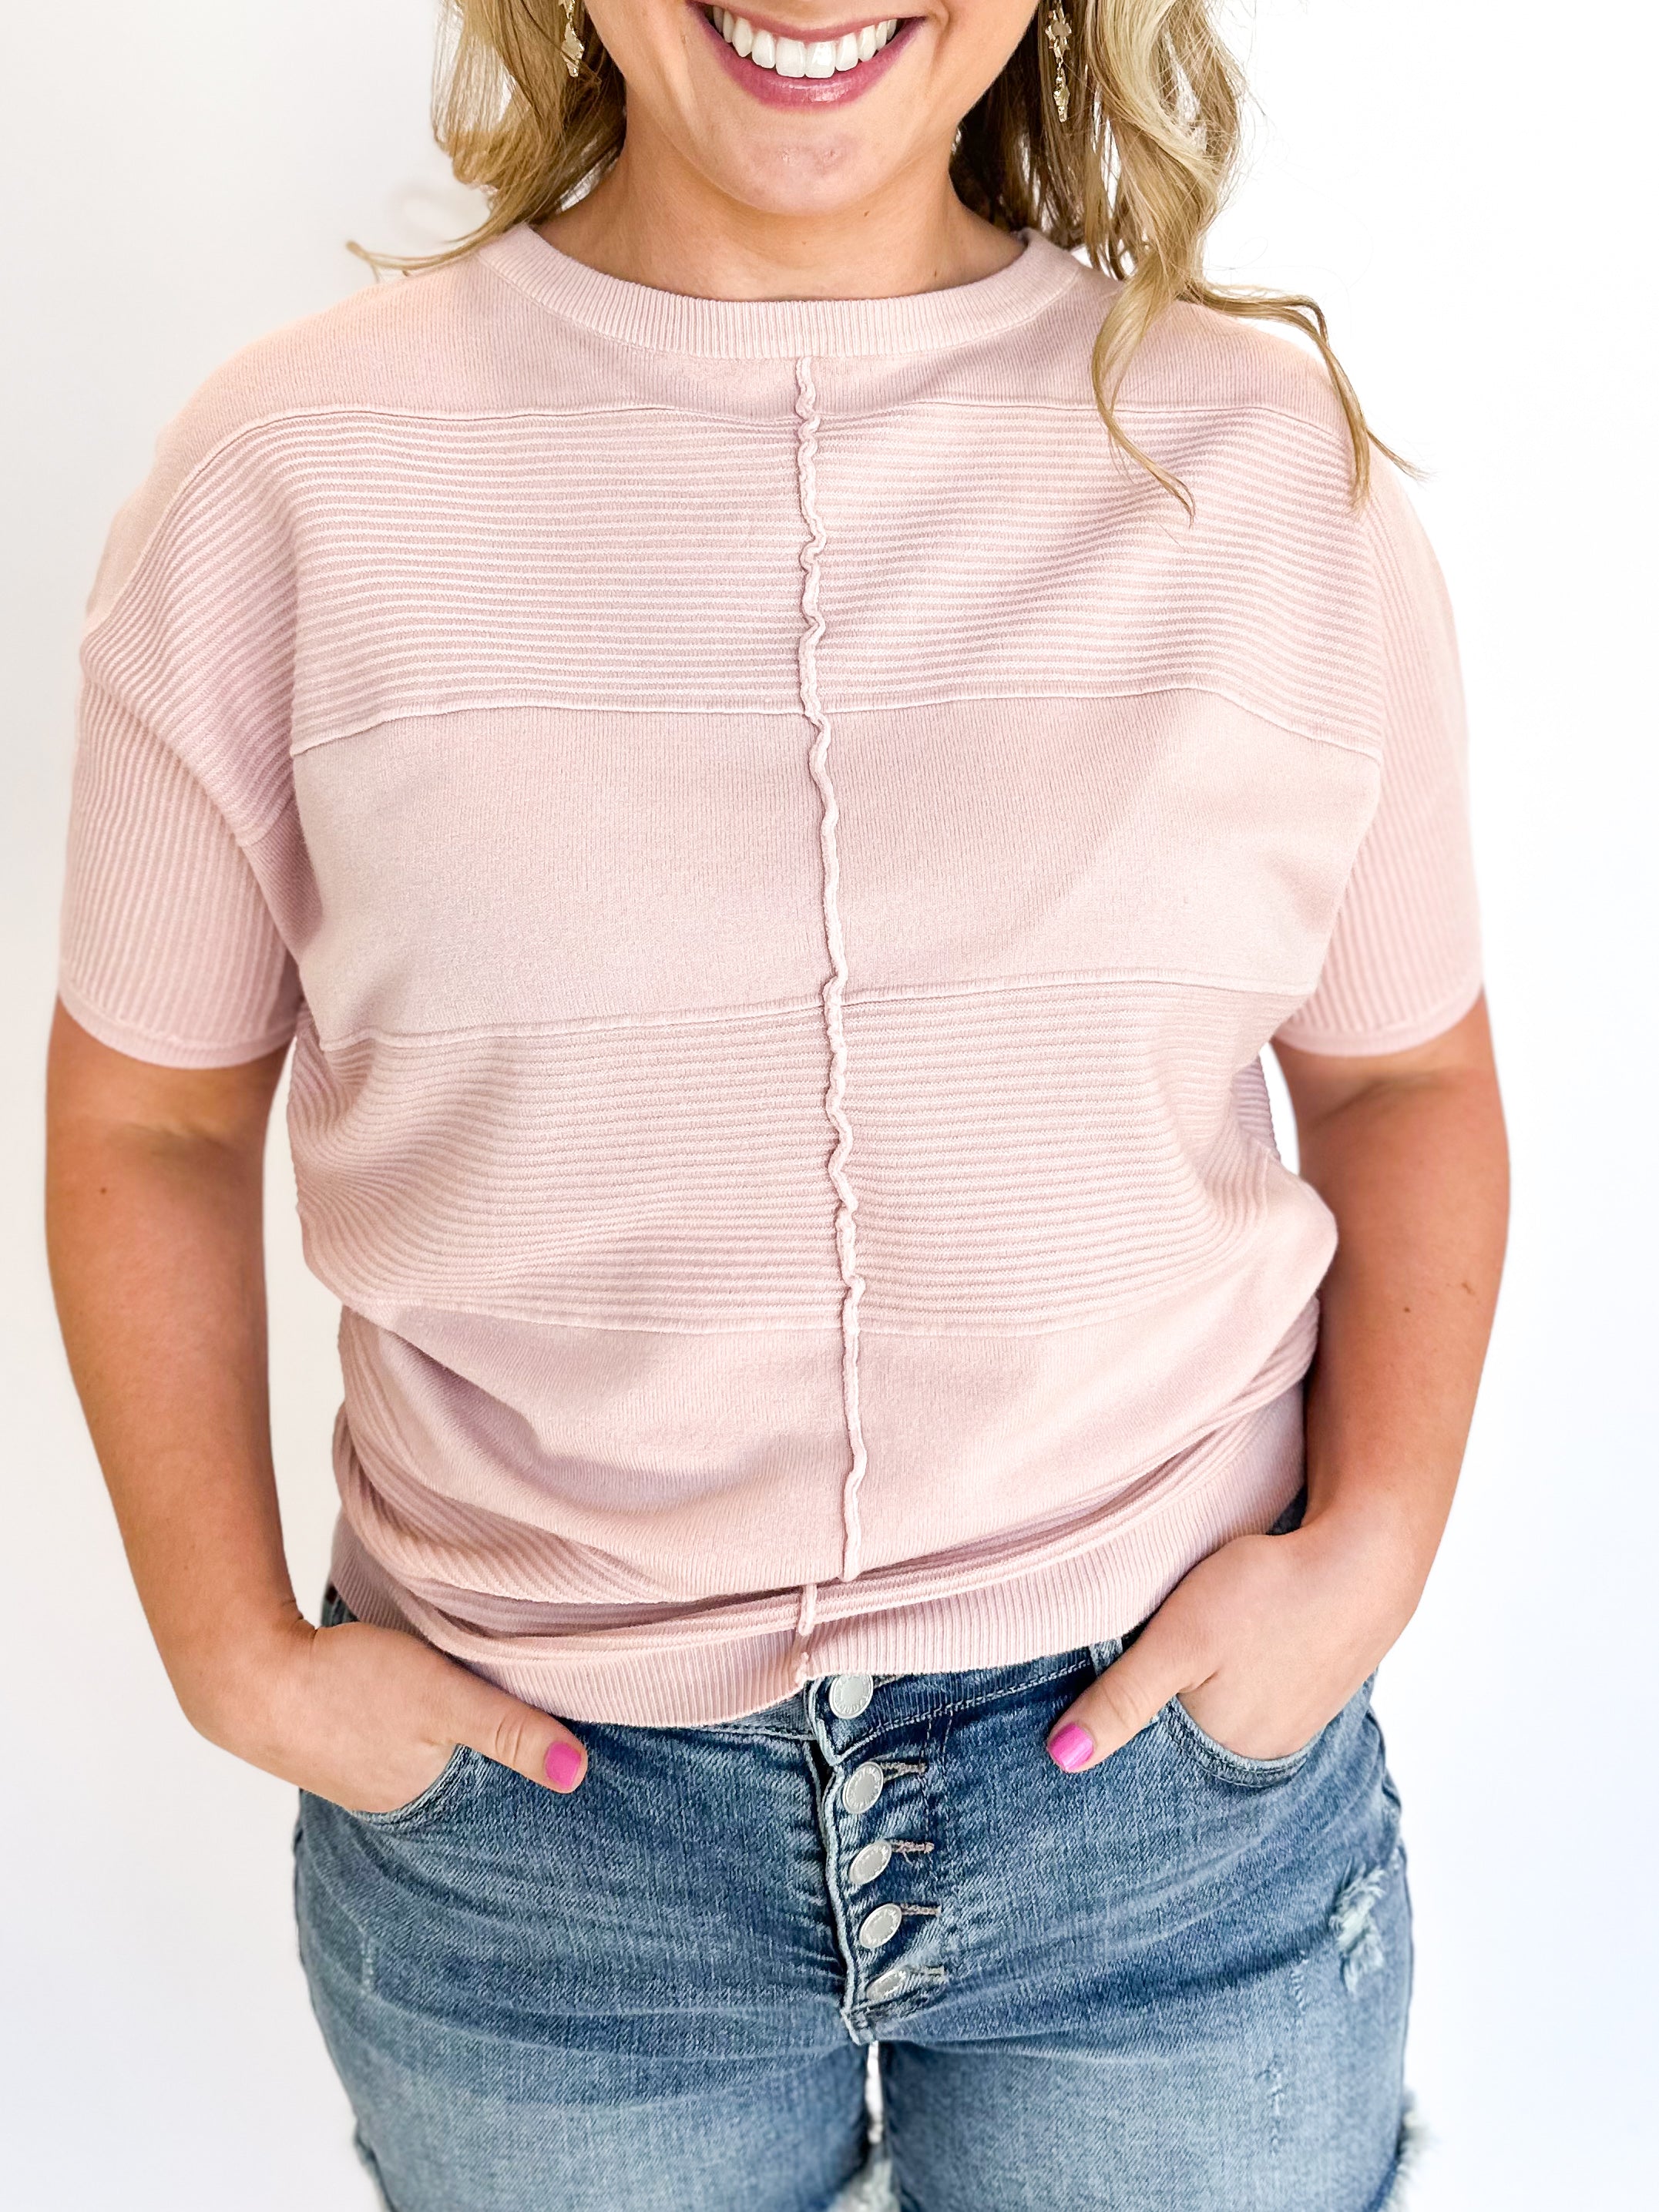 Rose Knit Blouse-230 Sweaters/Cardis-ALLIE ROSE-July & June Women's Fashion Boutique Located in San Antonio, Texas